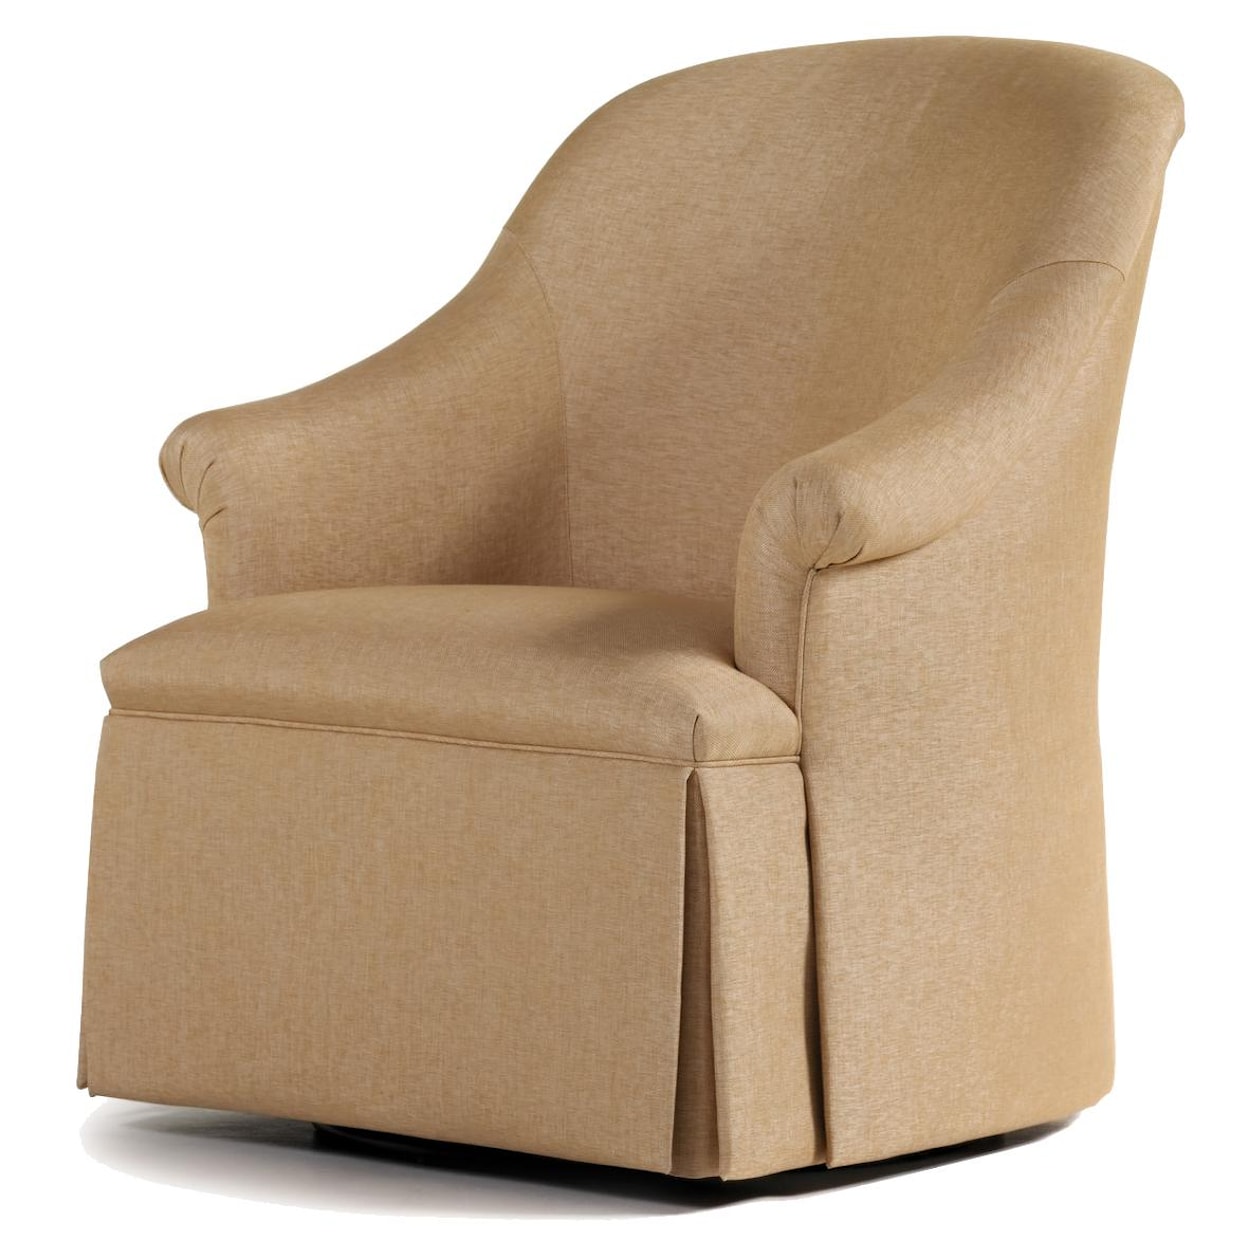 Jessica Charles Fine Upholstered Accents Lori Swivel Chair